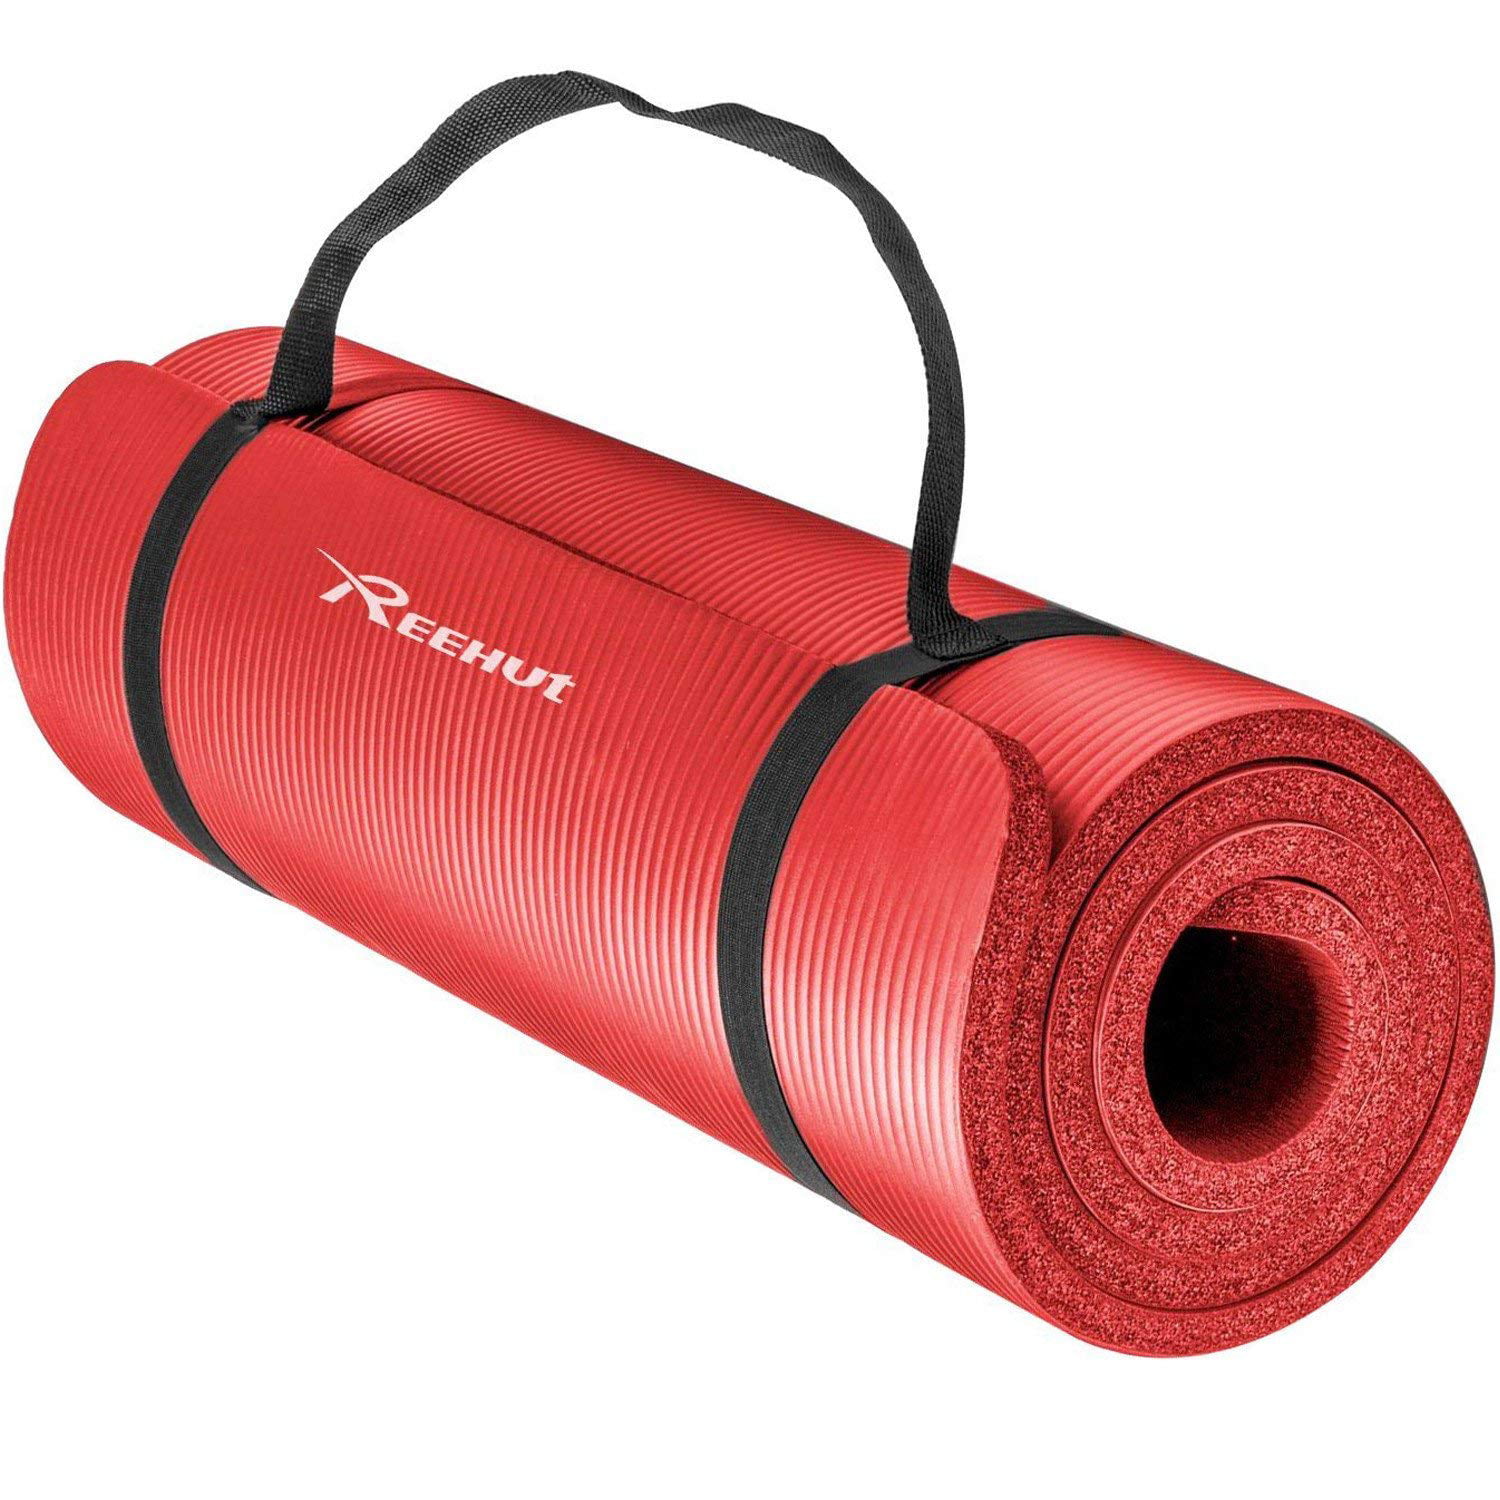 Reehut 1/2-Inch Extra Thick High Density NBR Exercise Yoga Mat for